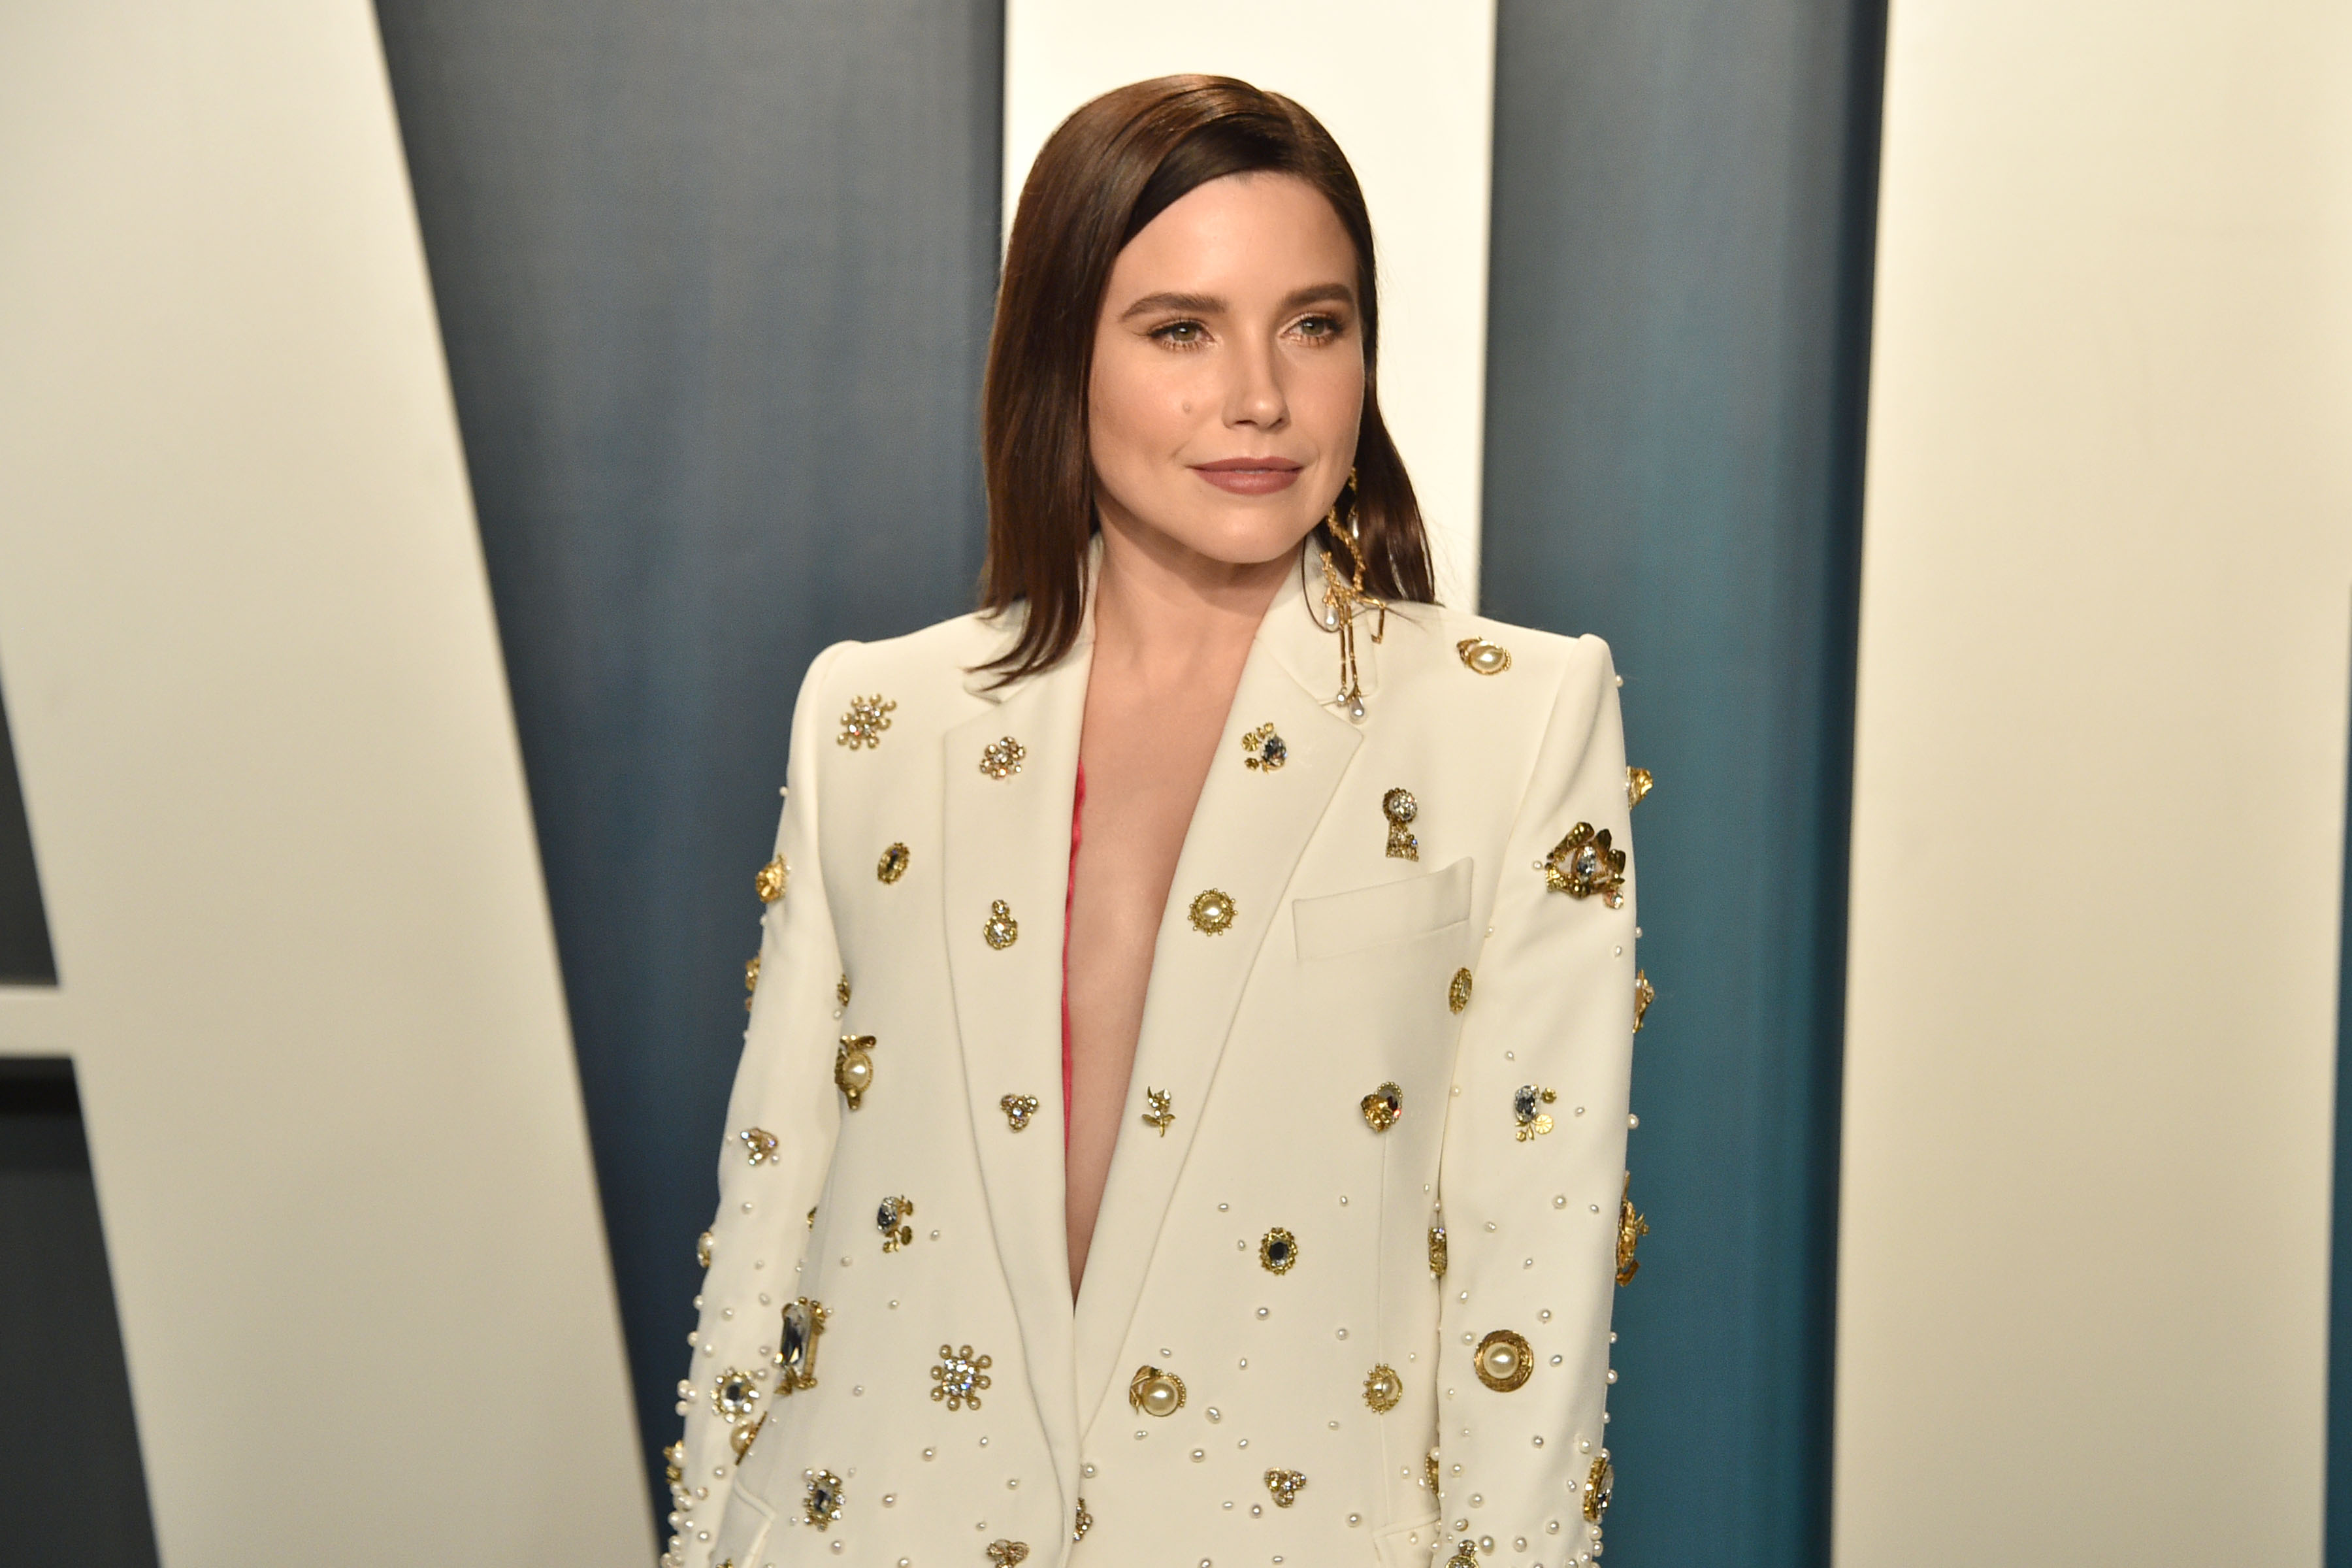 BEVERLY HILLS, CALIFORNIA - FEBRUARY 09: Sophia Bush attends the 2020 Vanity Fair Oscar Party at Wallis Annenberg Center for the Performing Arts on February 09, 2020 in Beverly Hills, California.